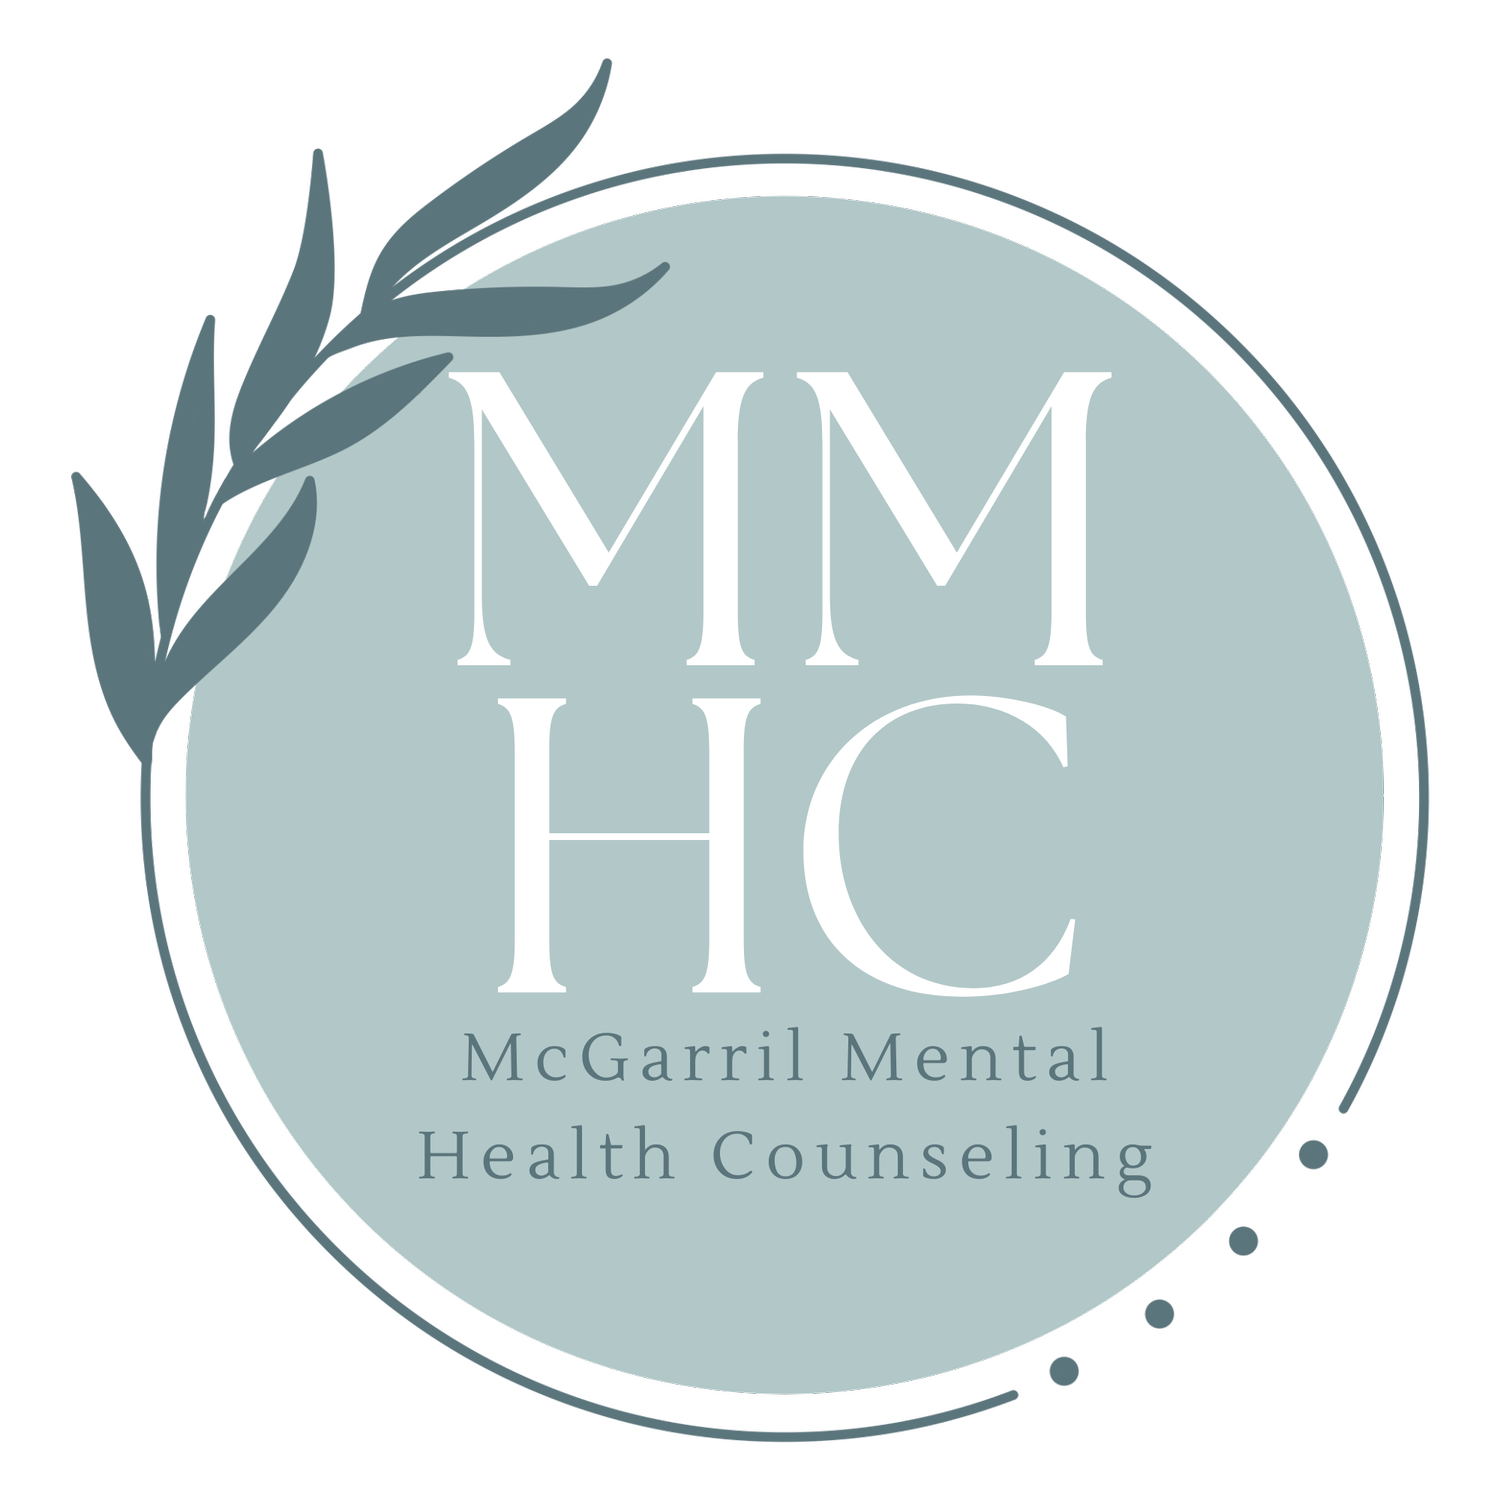 McGarril Mental Health Counseling